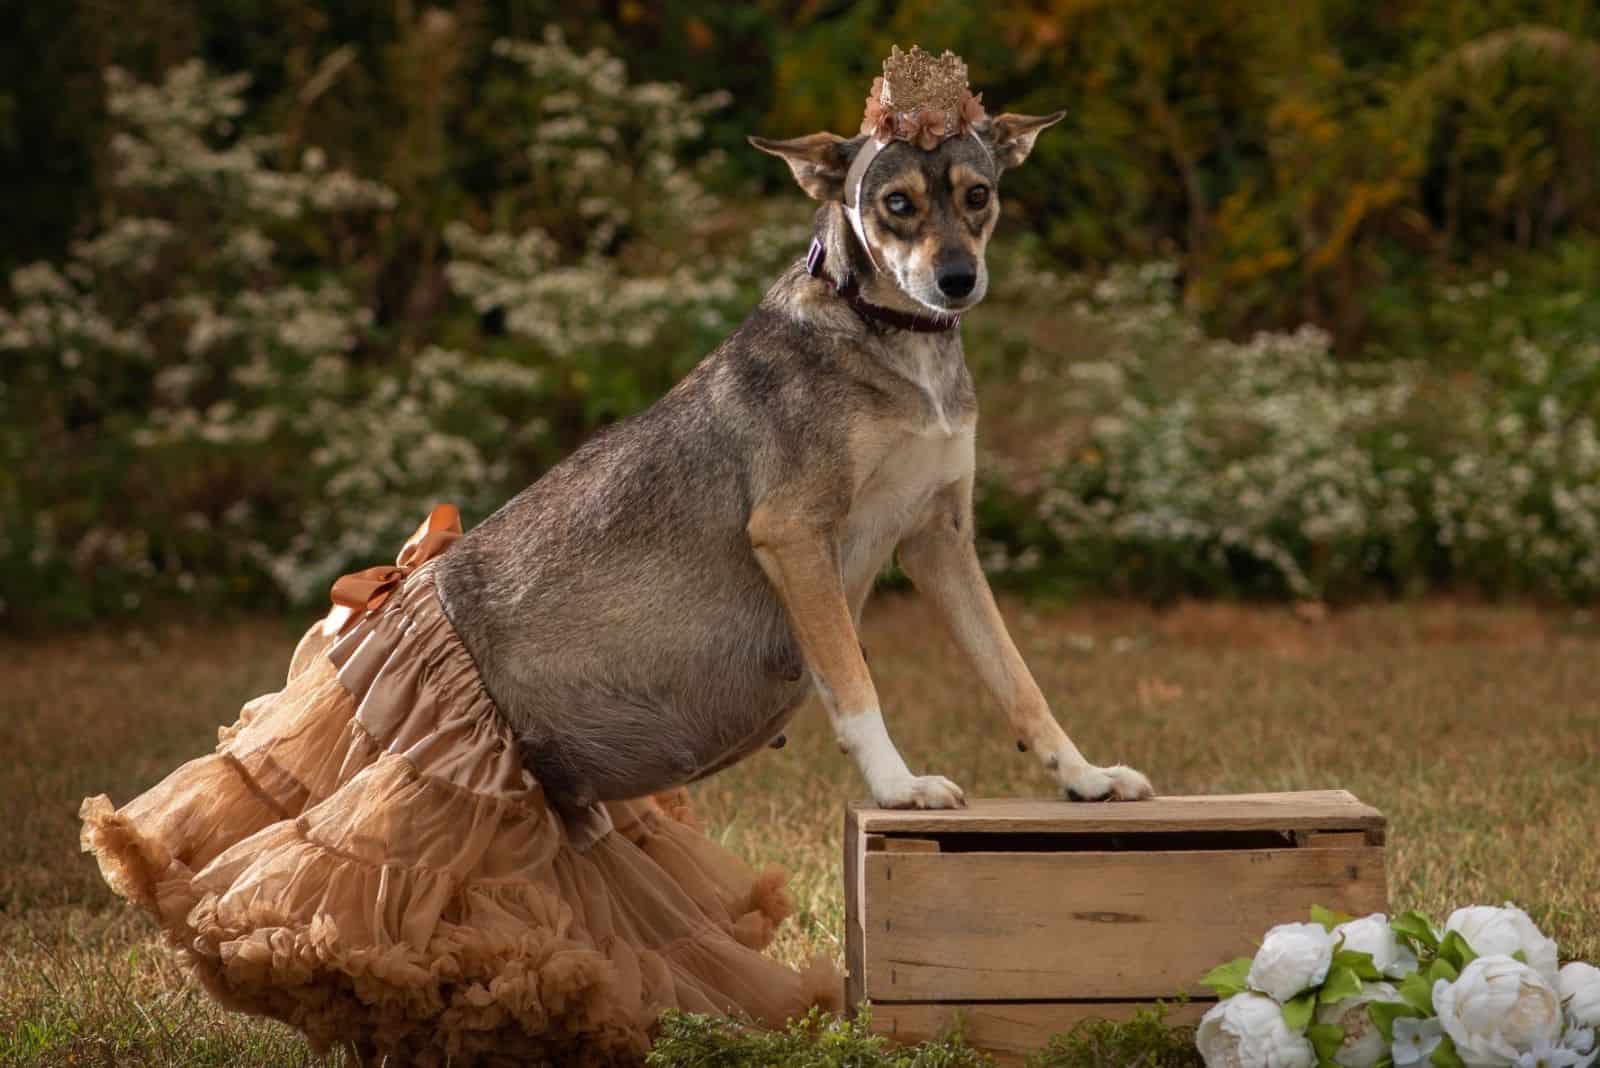 dog wearing a skirt posing for photography